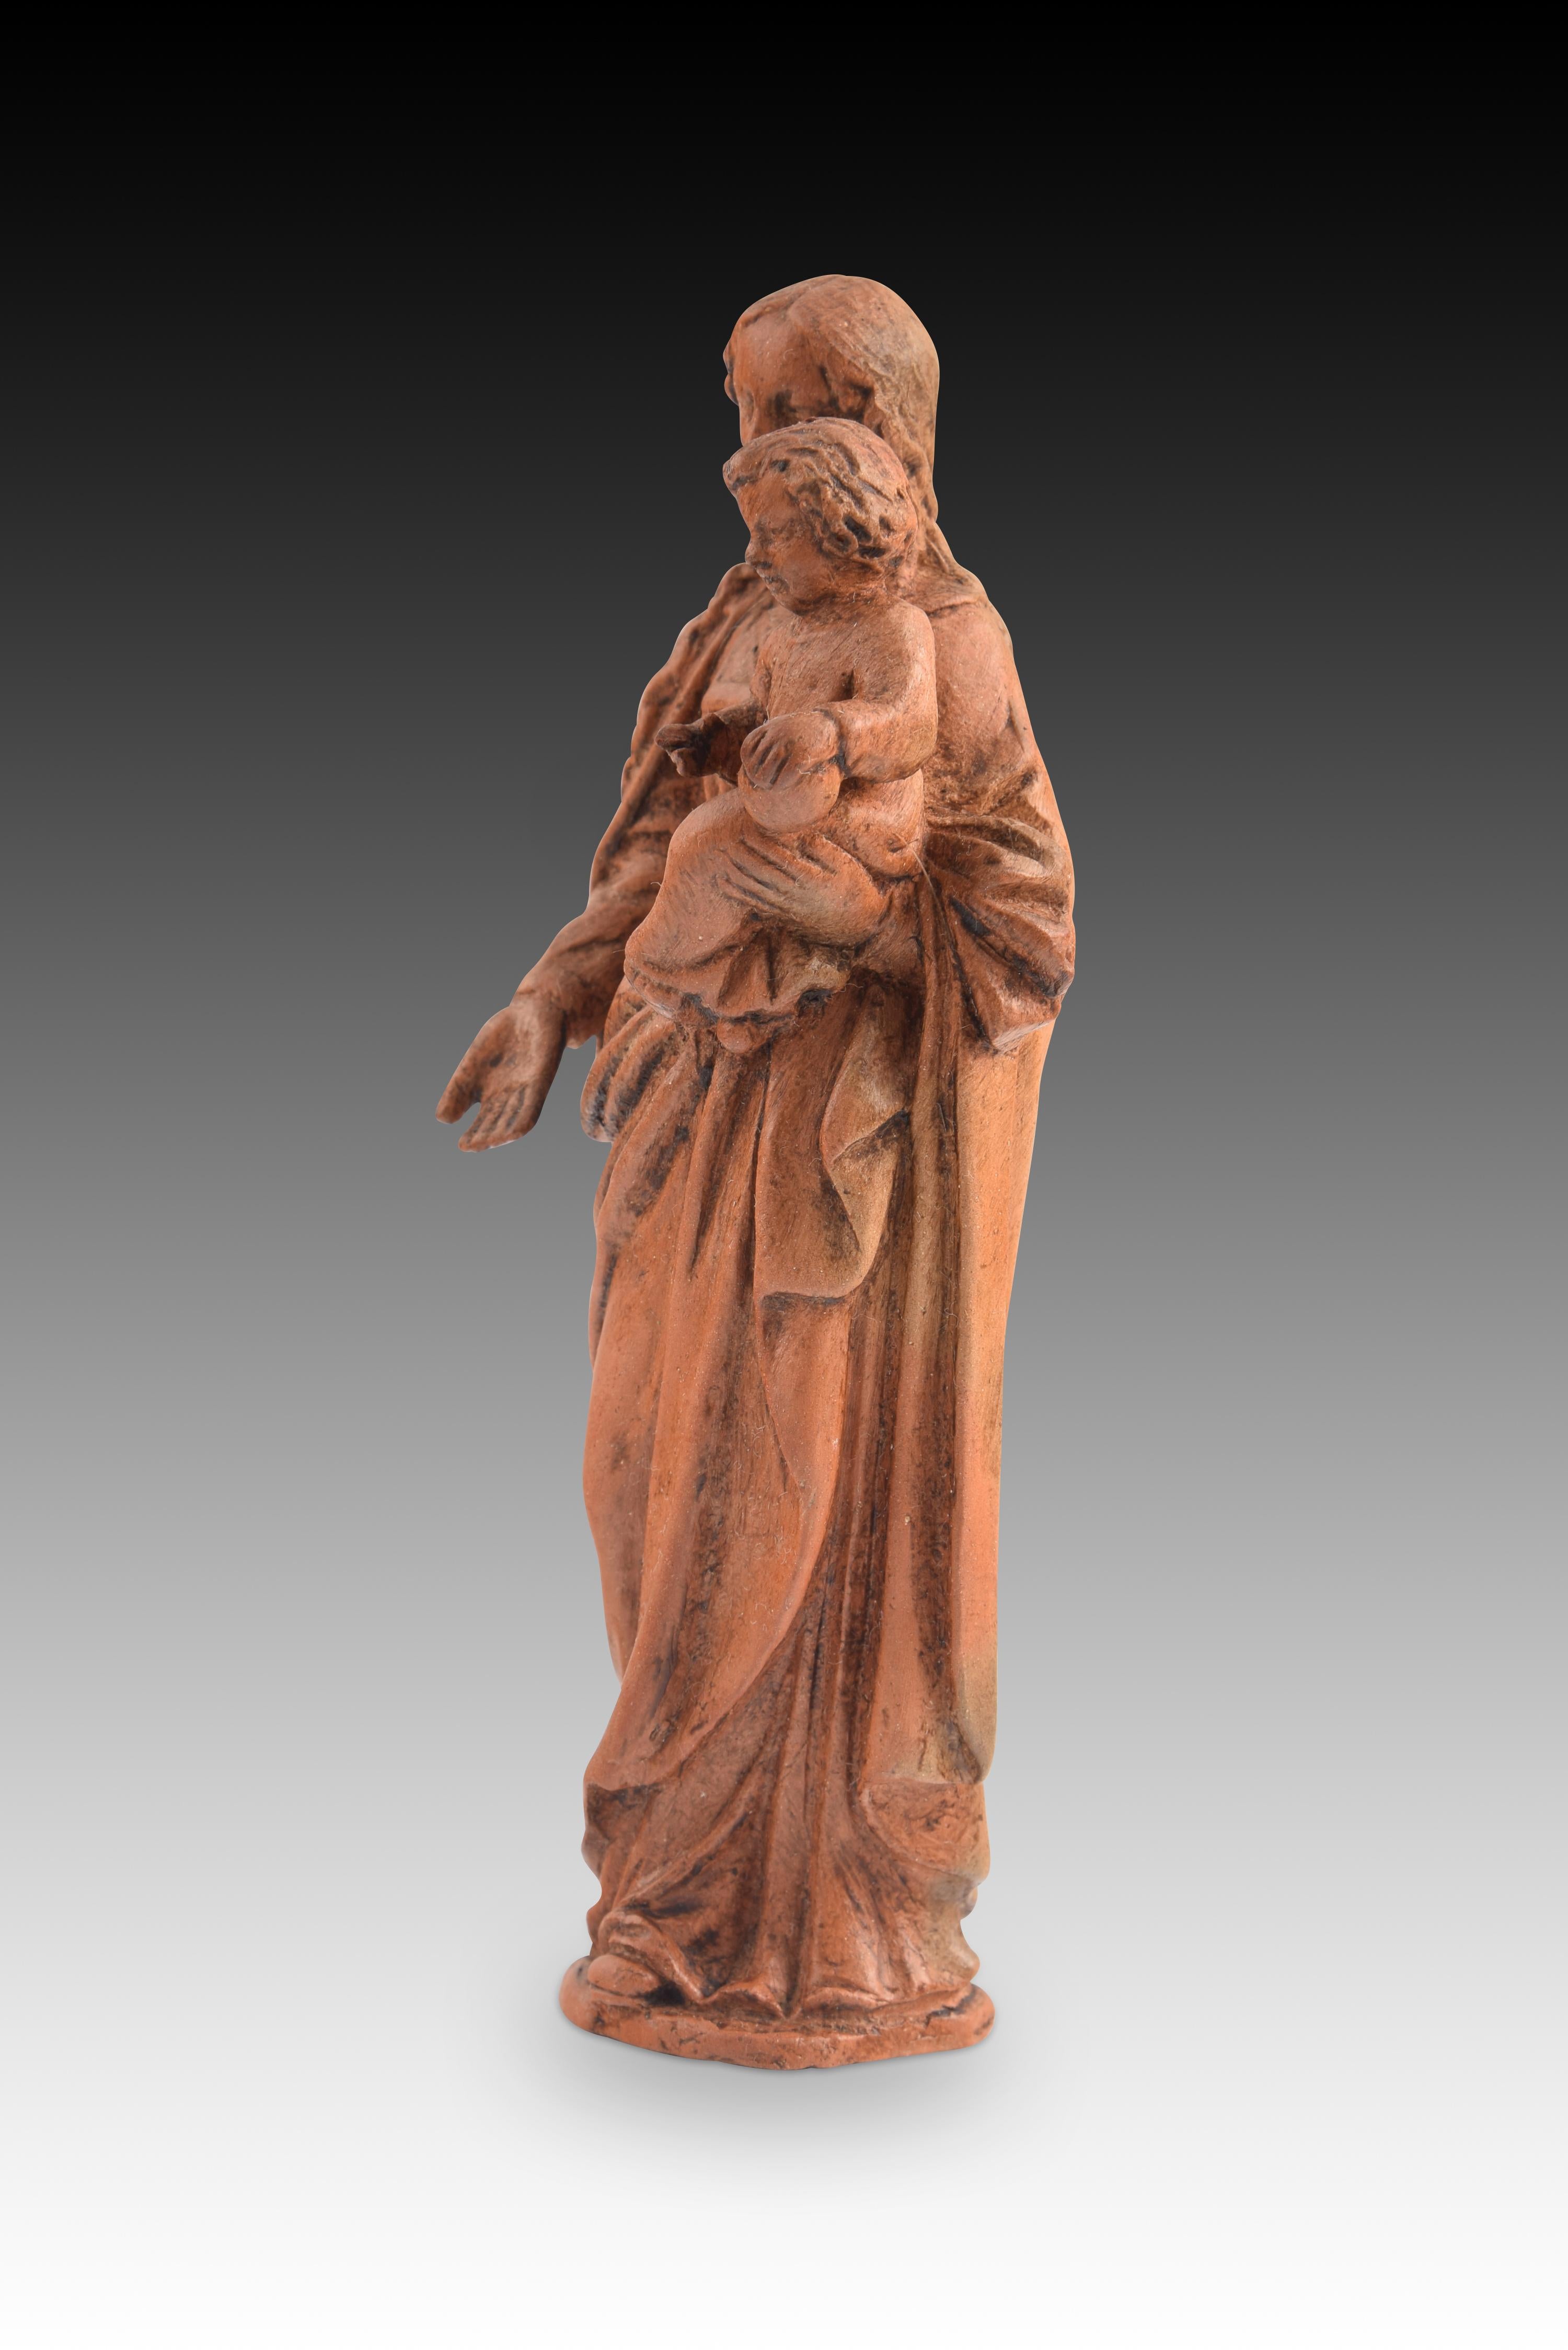 Virgin with Child. Terracotta. 20th century, following models from the 17th century. 
Figure of Virgin with Child Jesus, made following common models in Spanish Baroque sculpture of the 17th century. Mary is presented standing, dressed in a tunic